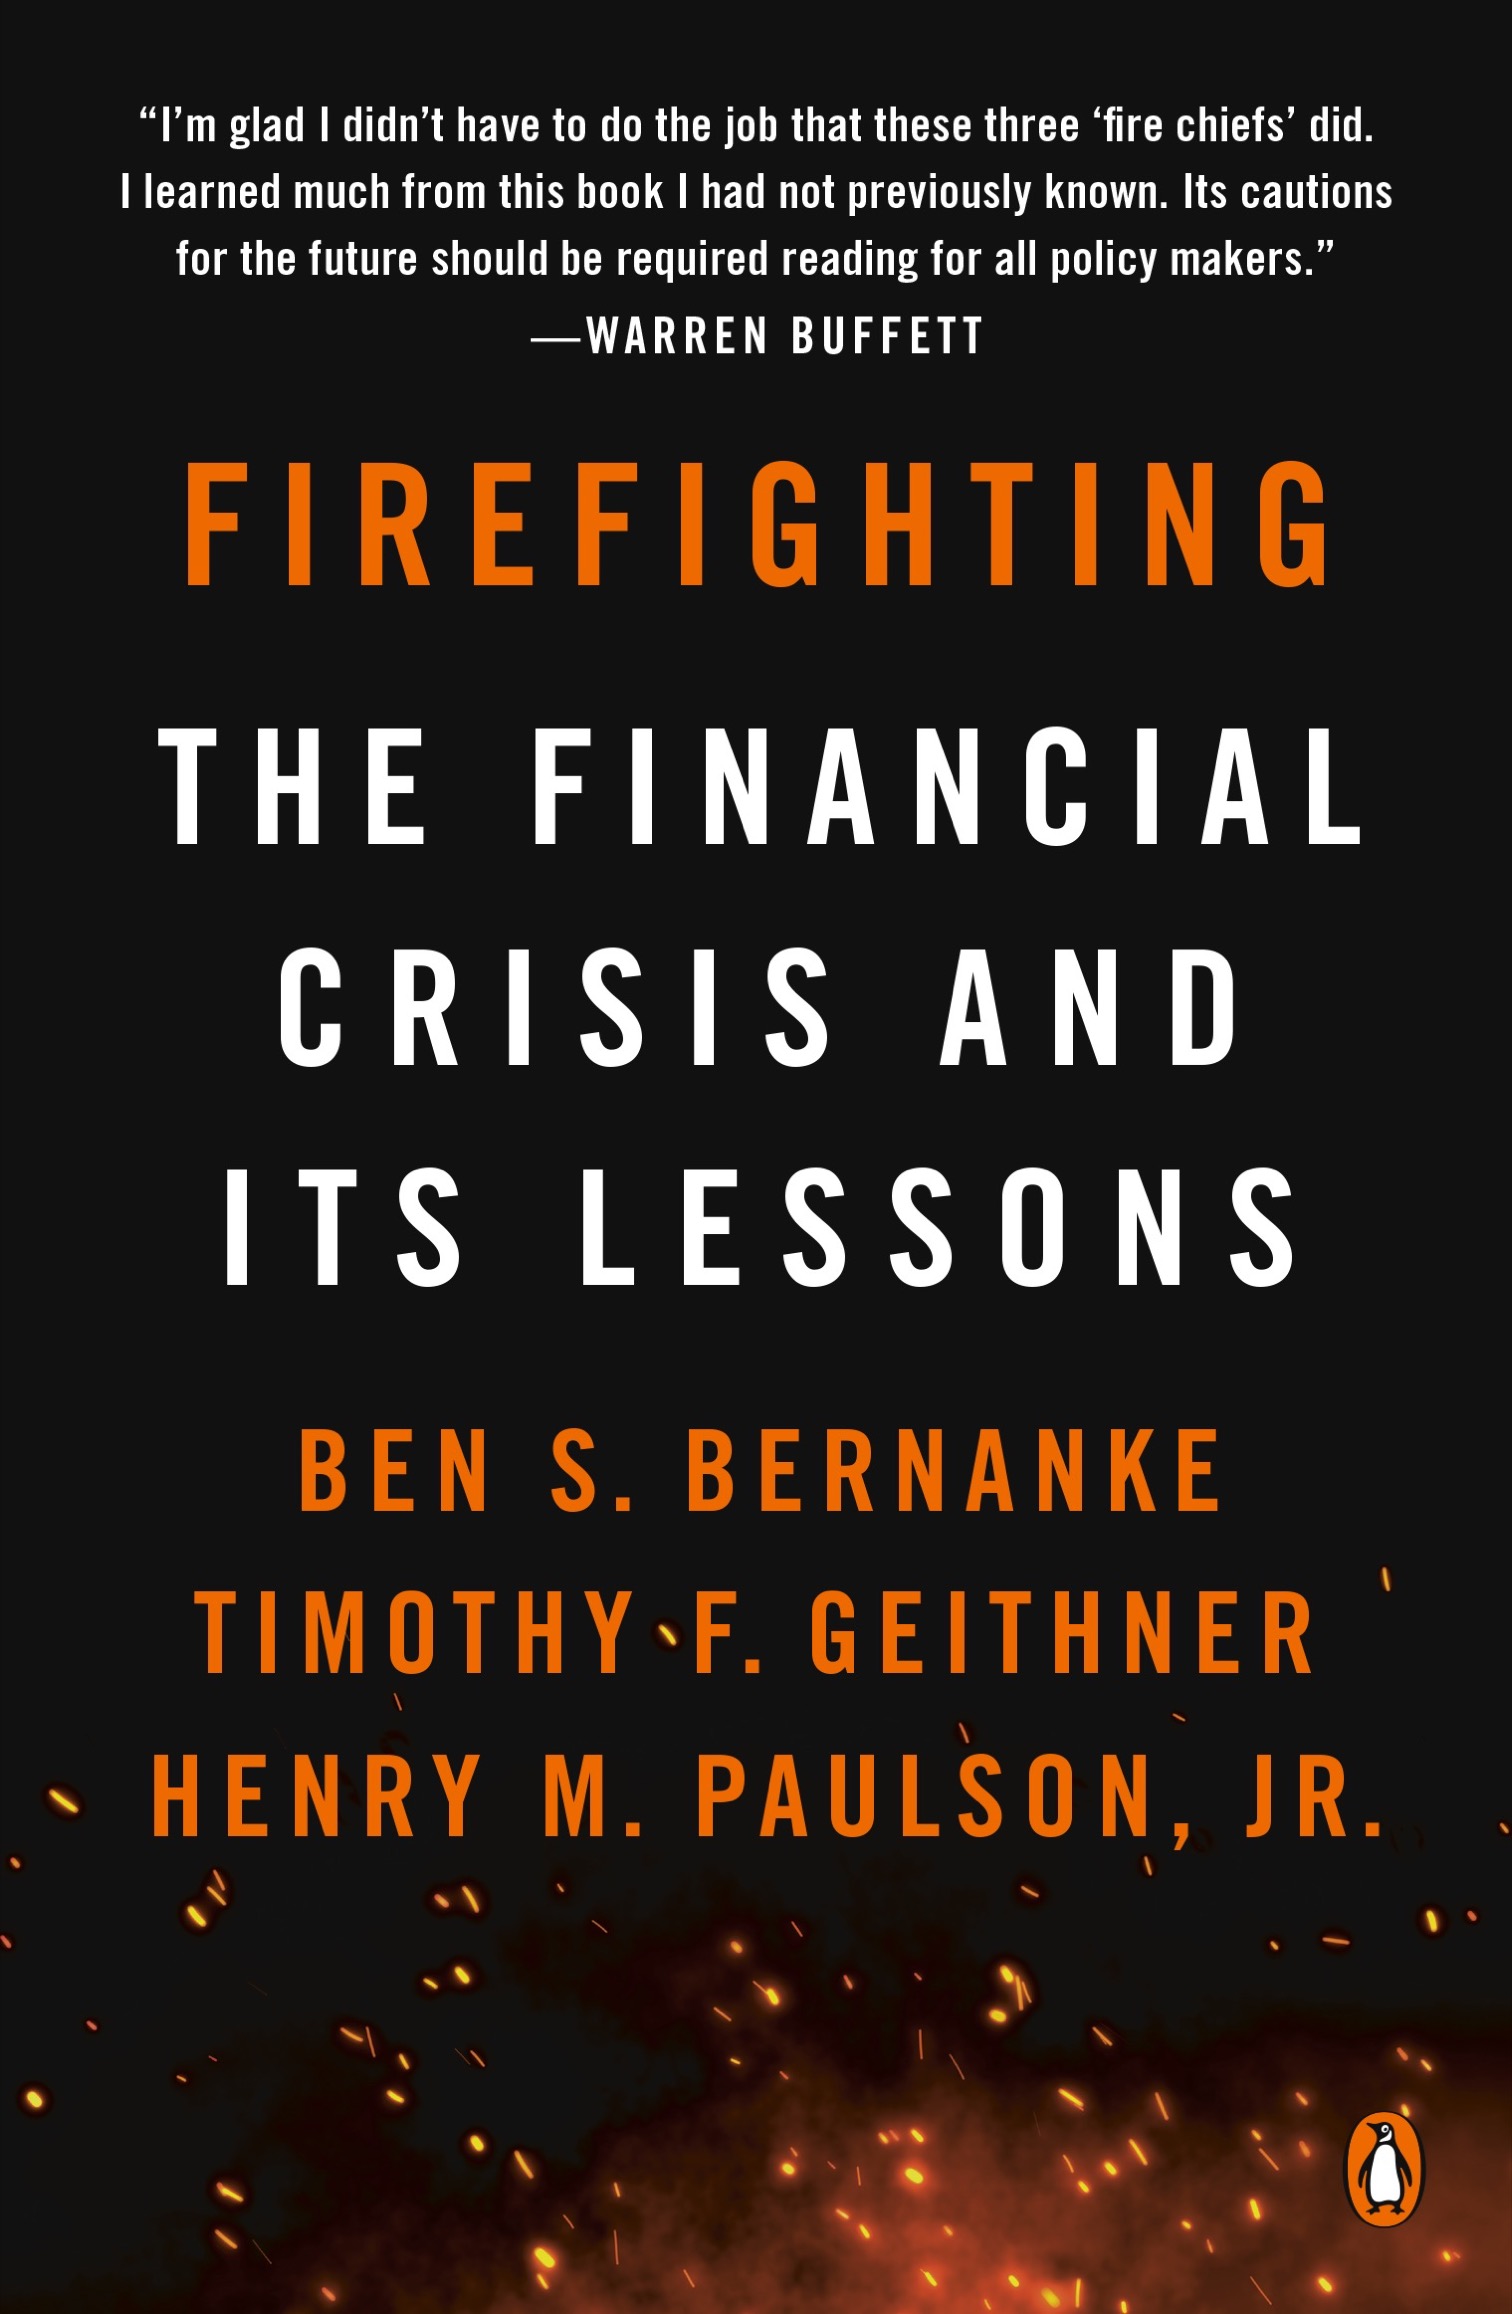 33.	Firefighting : the financial crisis and its lessons